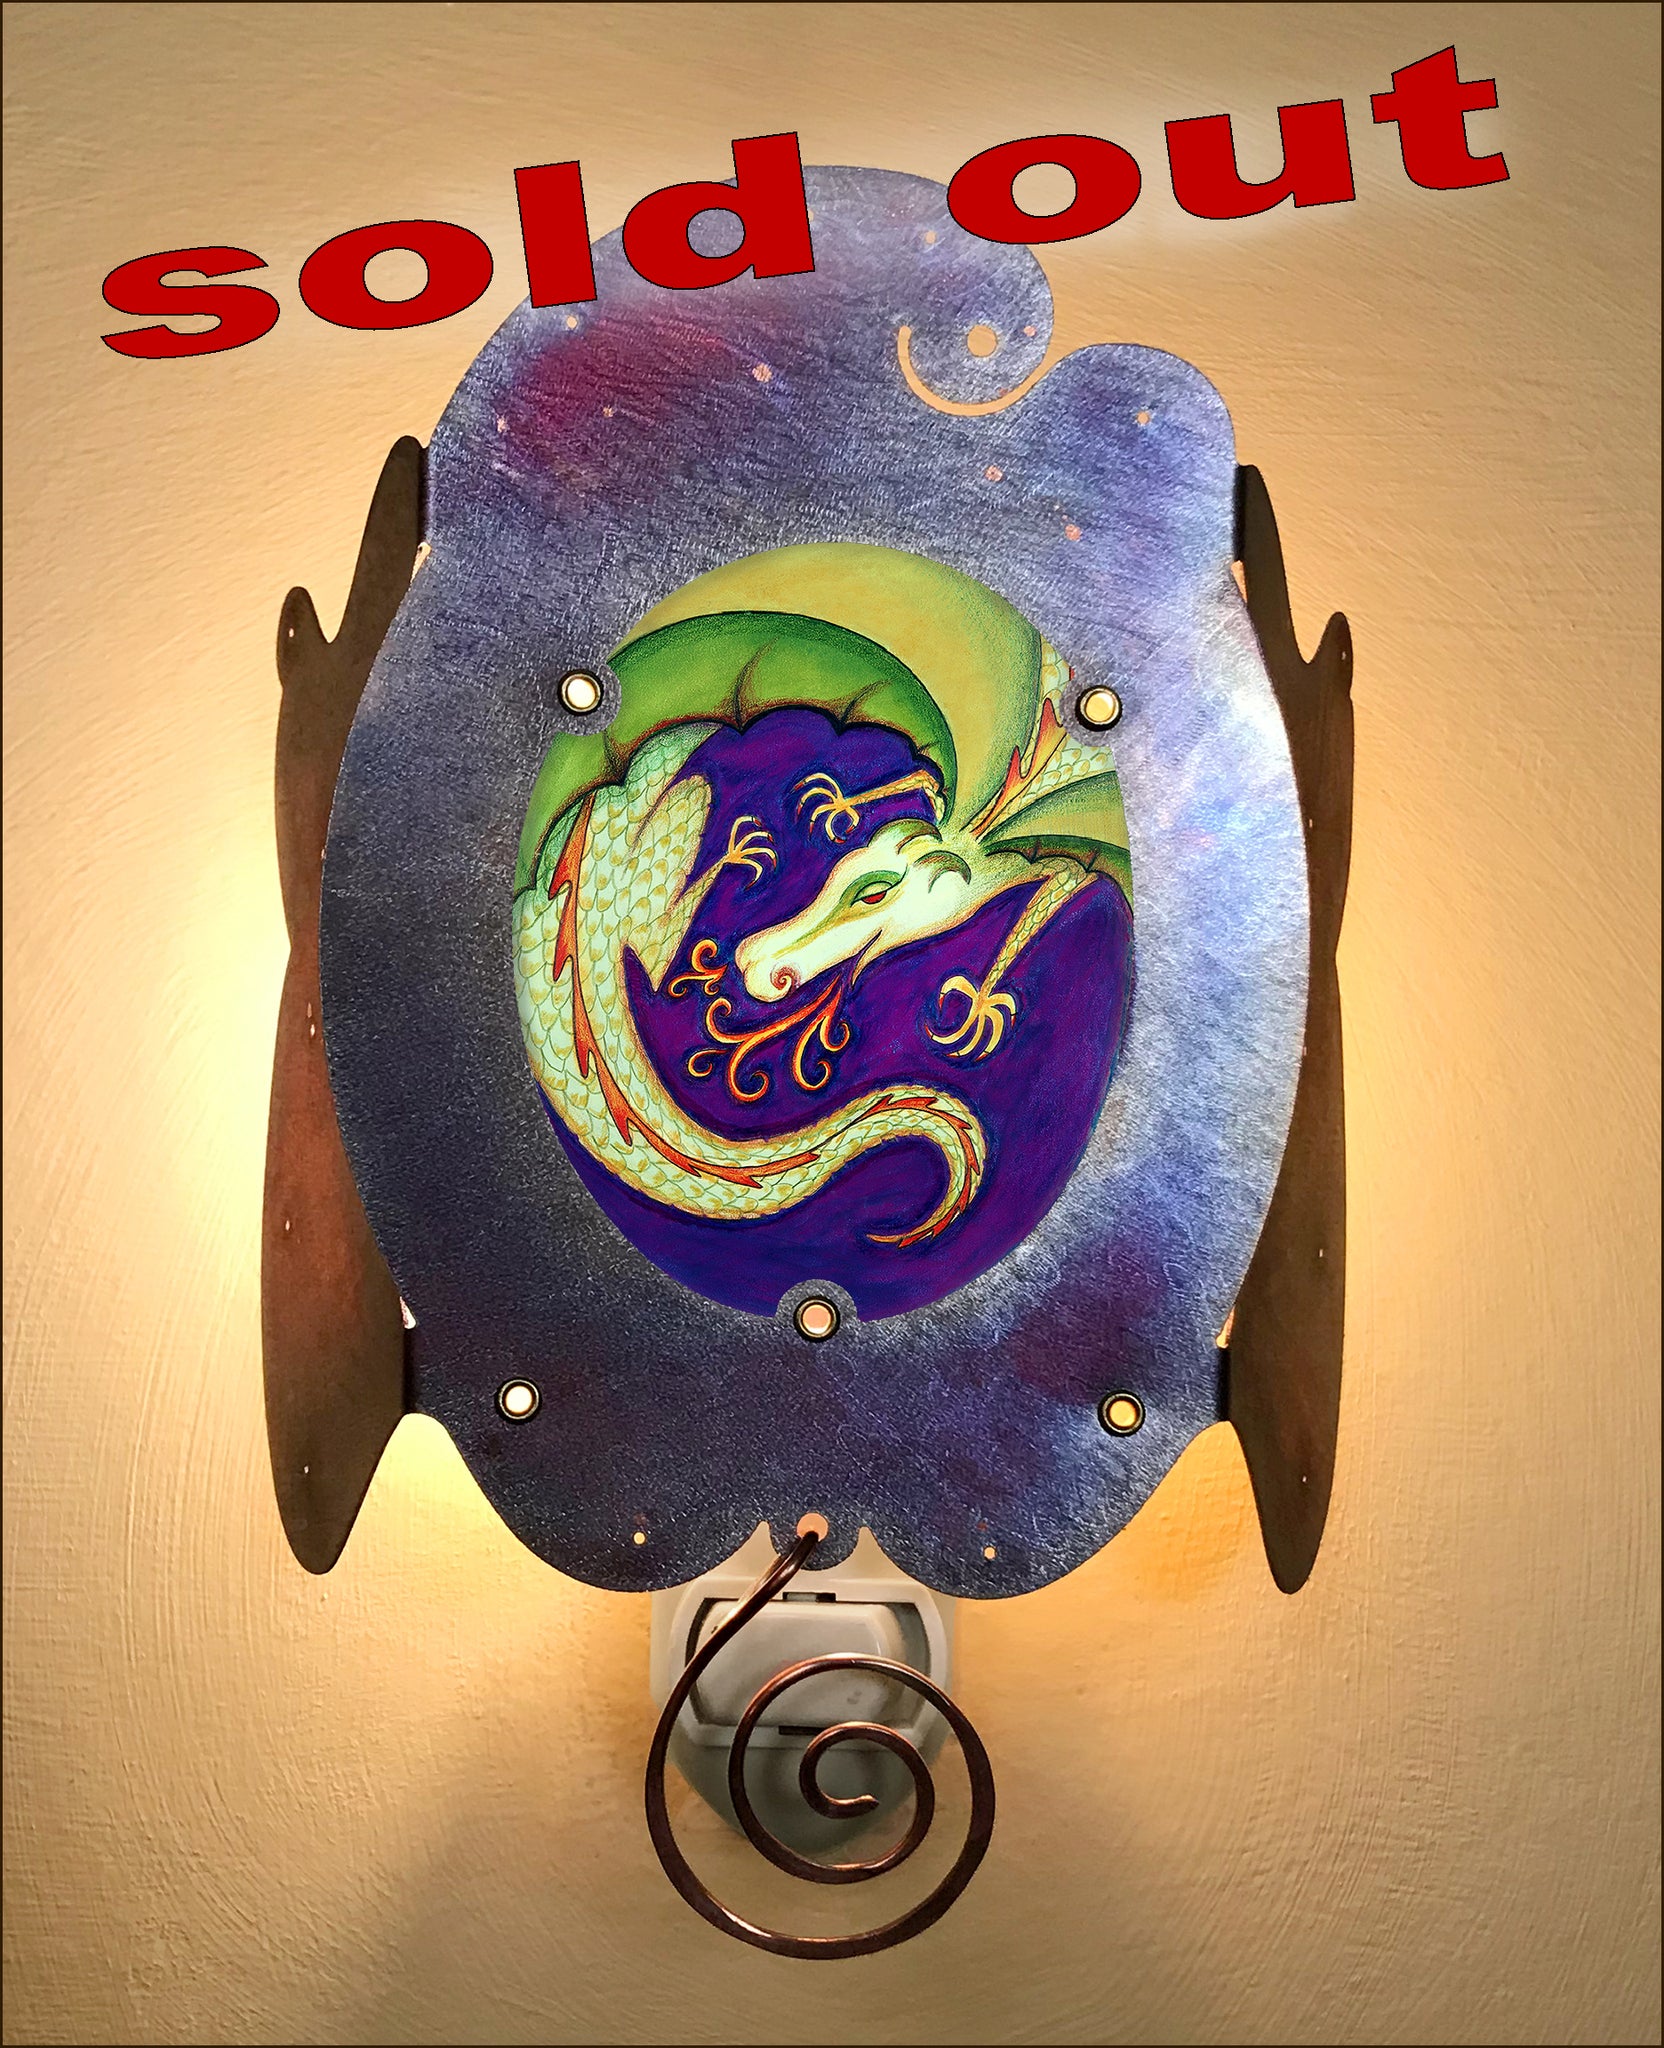 Dragon Luminette - SOLD OUT